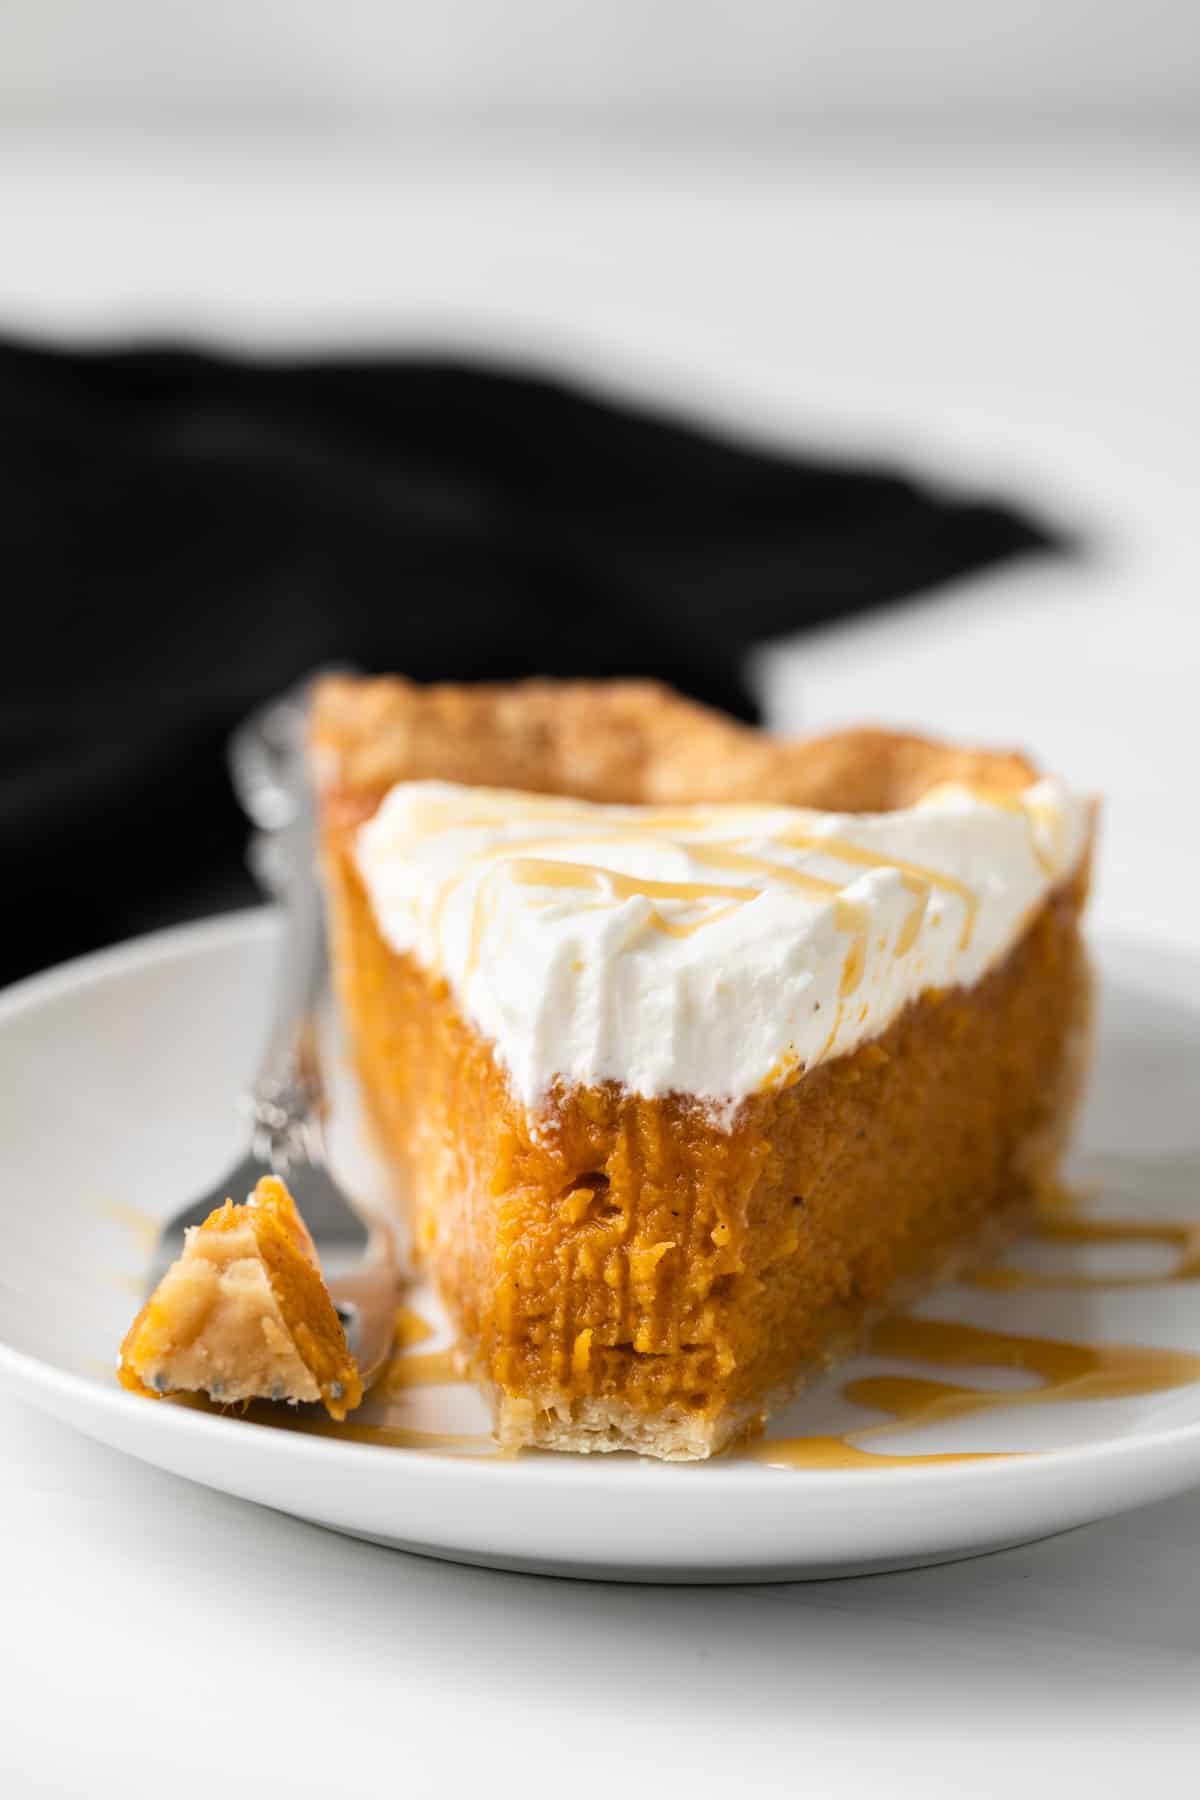 Slice of caramel sweet potato pie on a white plate with fork taking a bite out